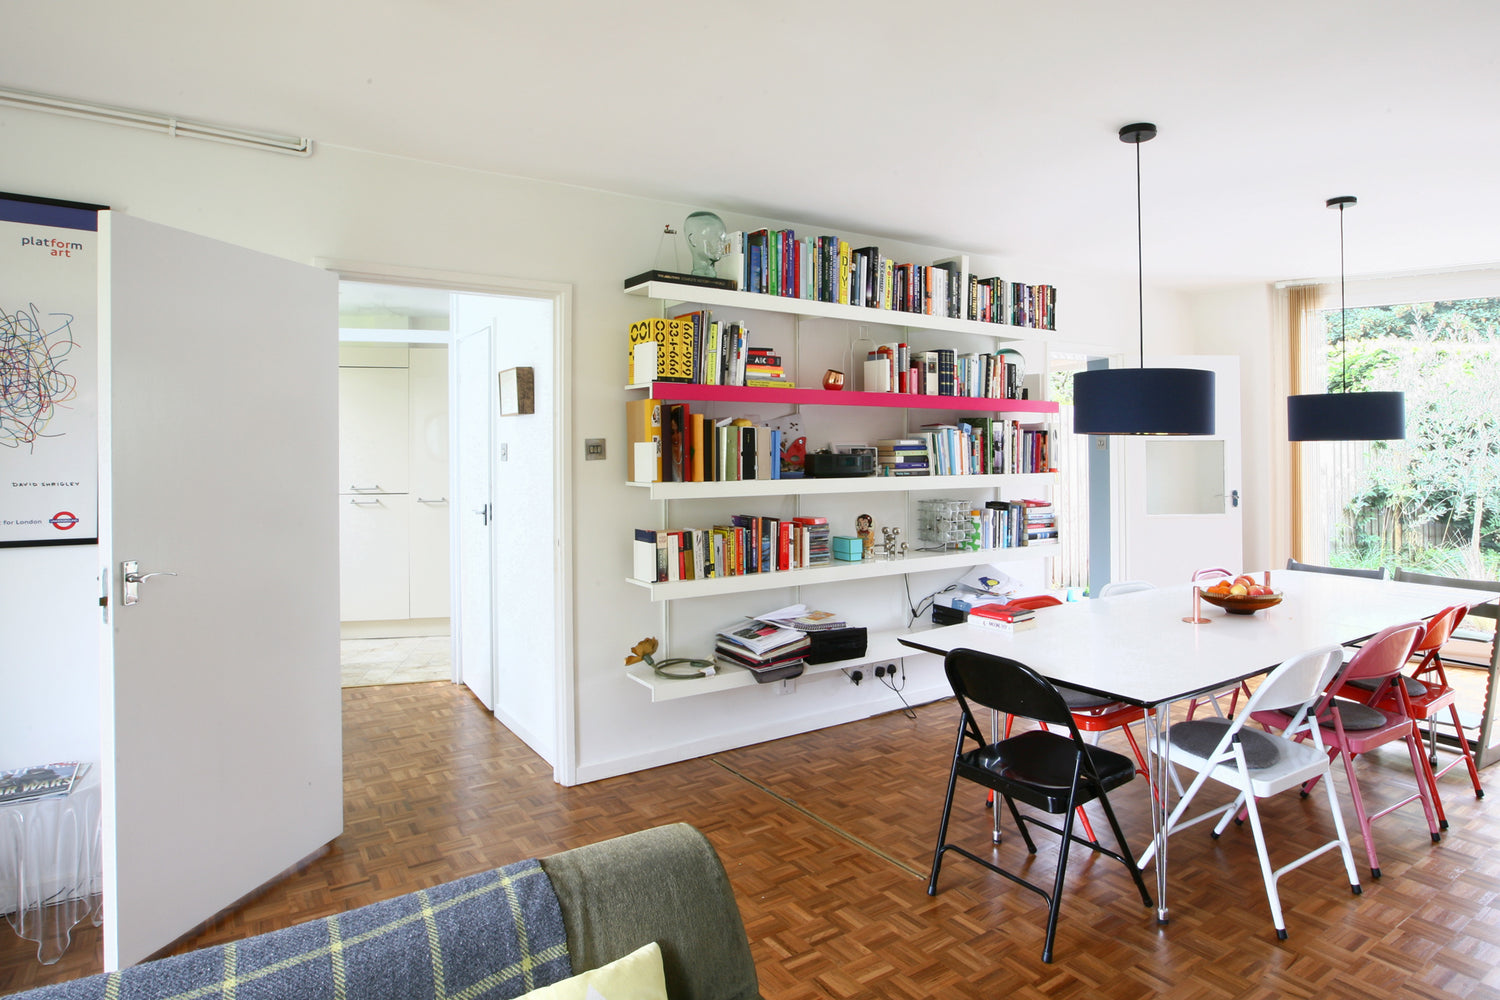 Book shelving system wall mounted in modern span house